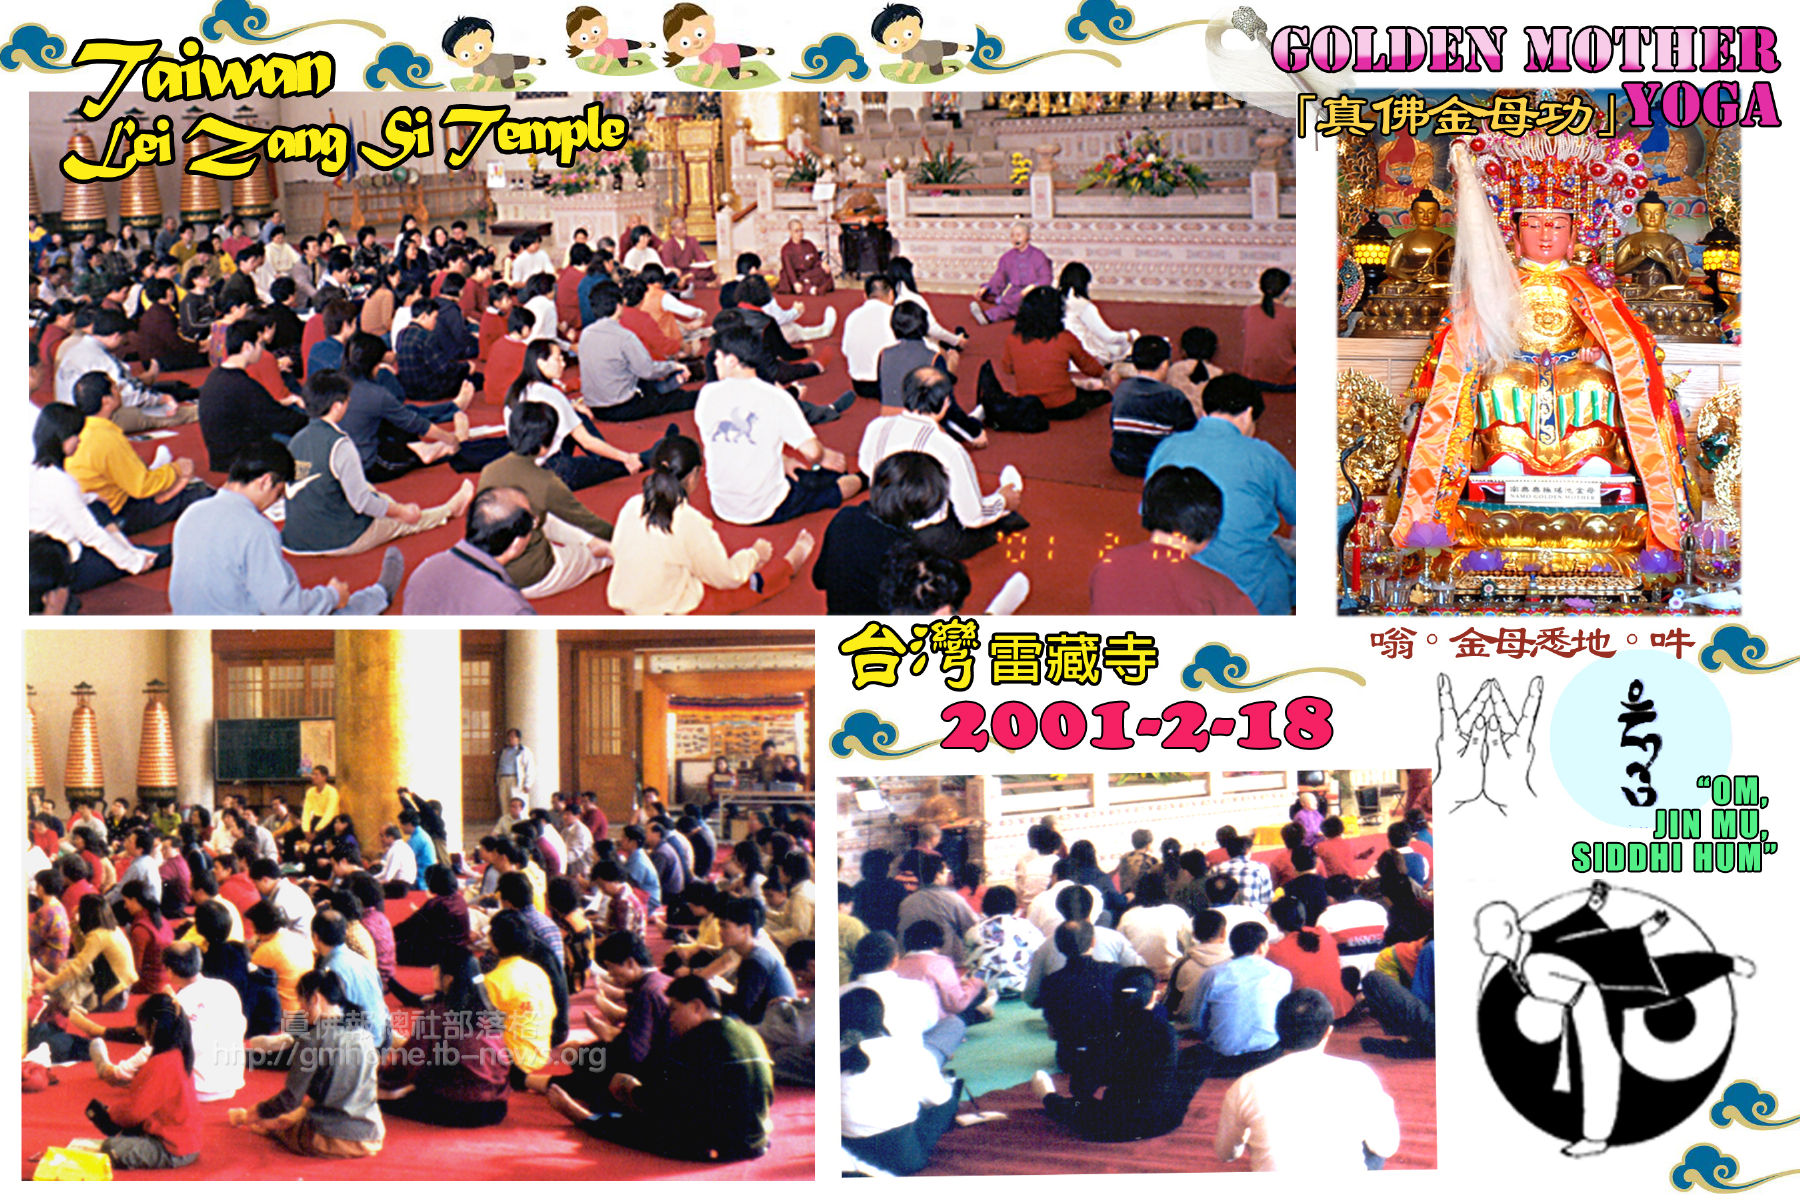 D-p05-Golden Mother Yoga_Taiwan Temple_2001 Feb 18 with yoga kids (simple border)_w_r